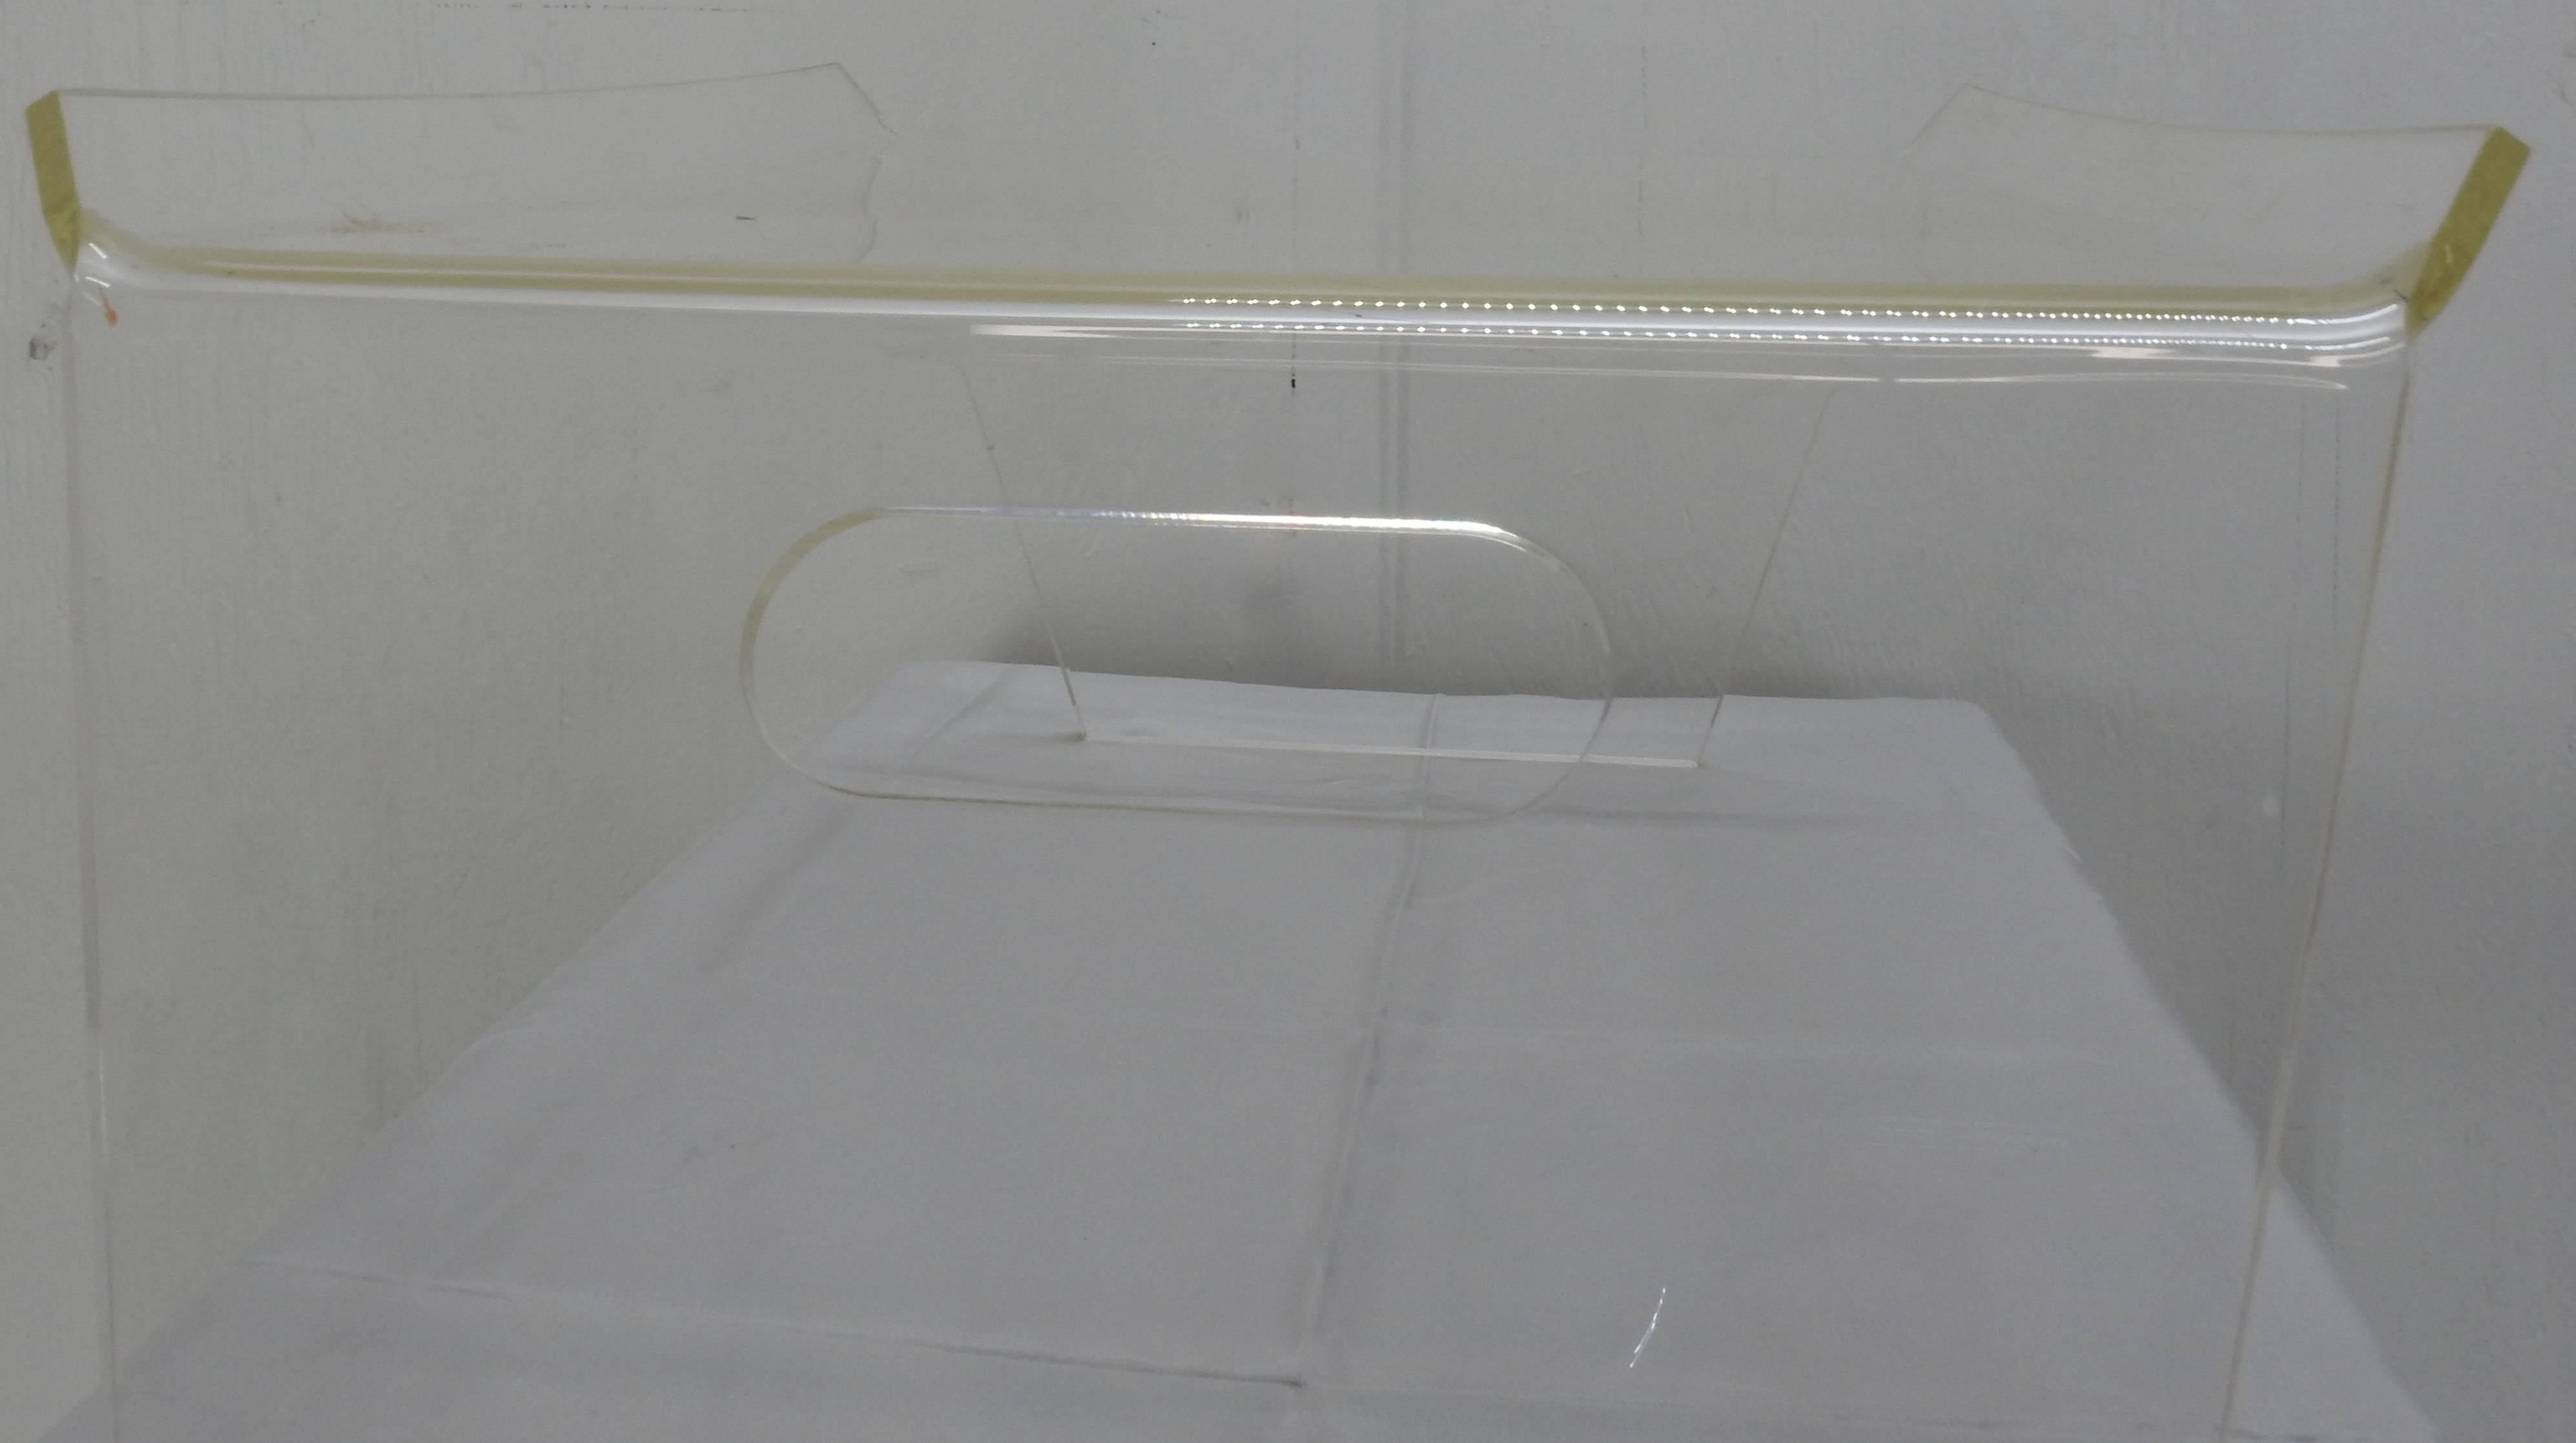 We are offering a clear Lucite bed tray. This tray has a rectangular surface with slanted rims along the long sides. It rests upon two splayed, trapezoidal legs with handle holes.
 